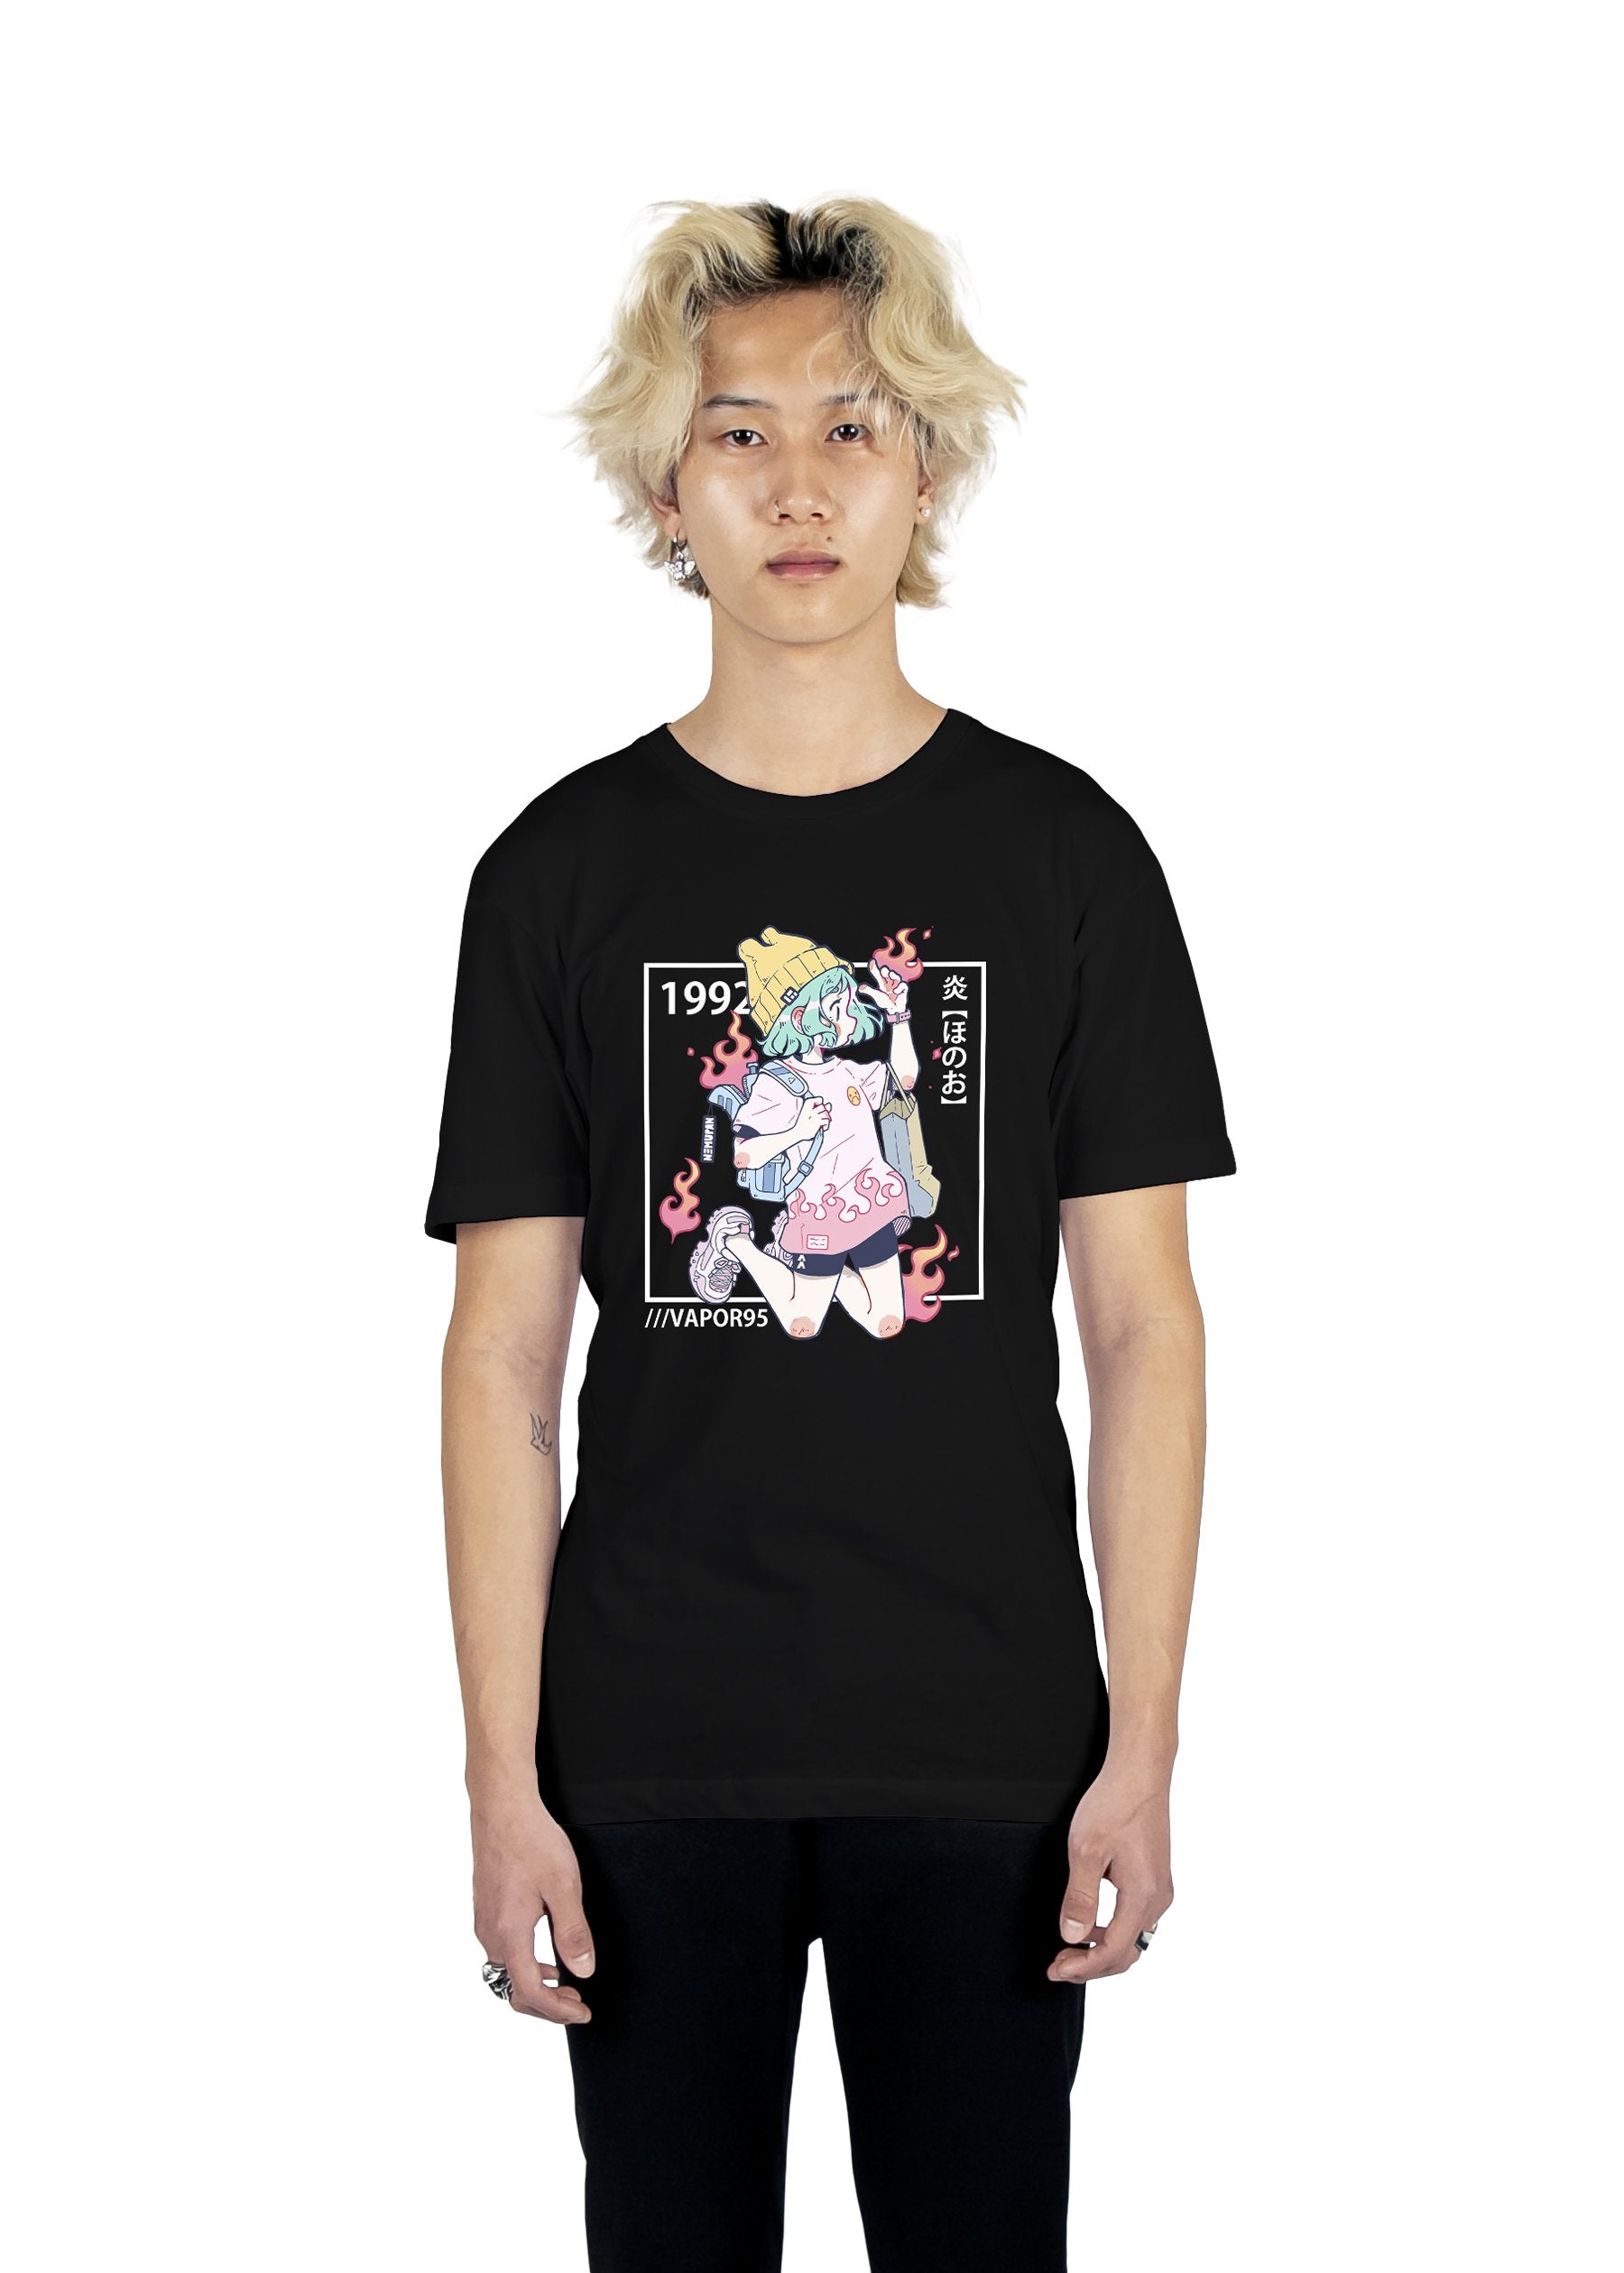 Playing With Fire Tee Graphic Tee DTG Black S